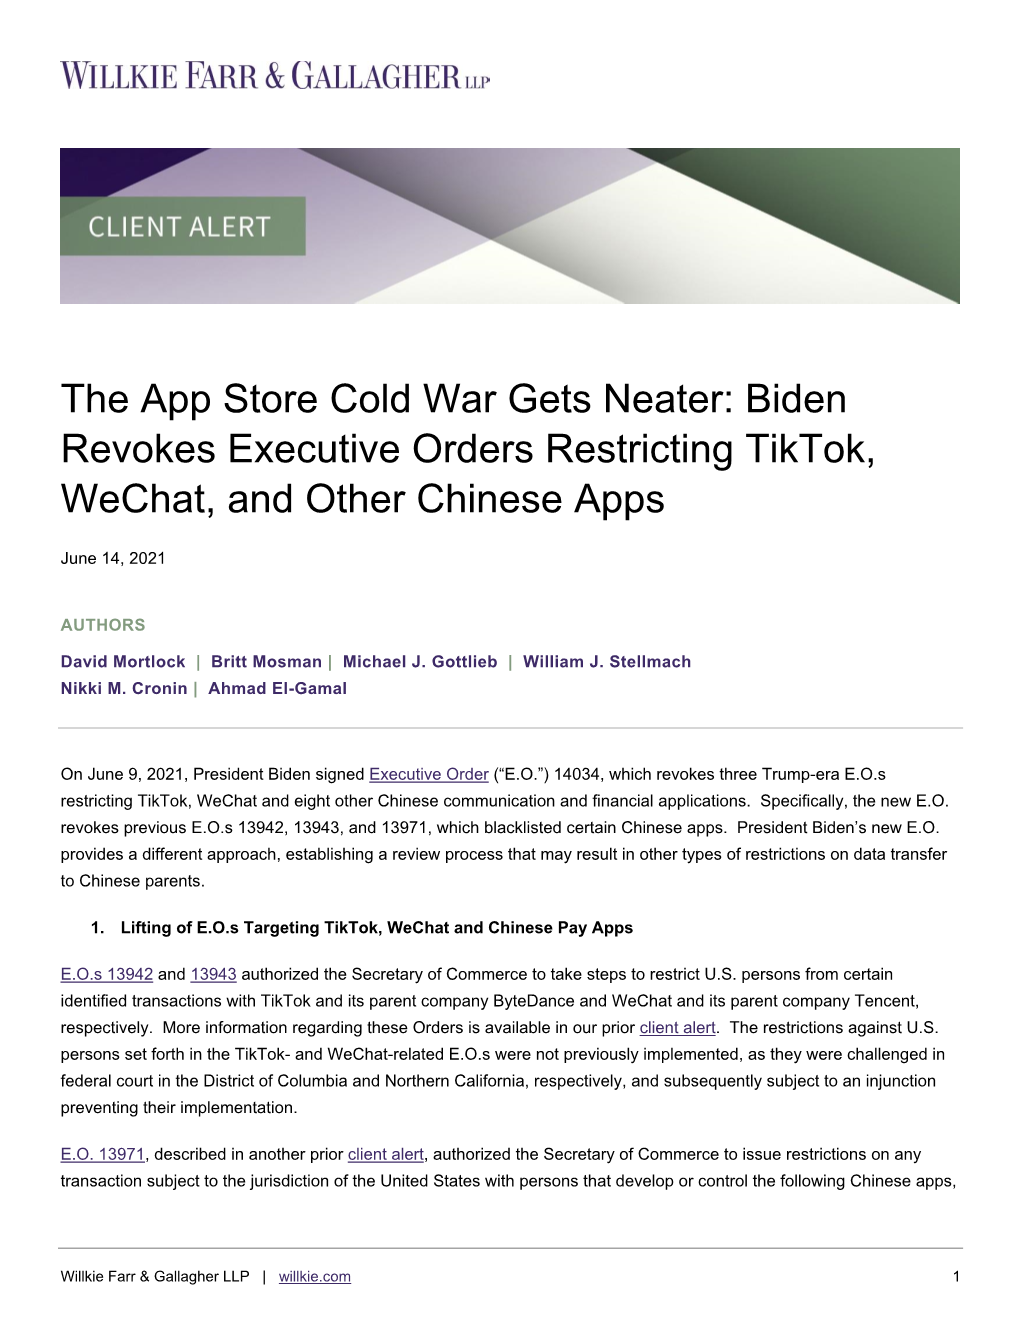 The App Store Cold War Gets Neater: Biden Revokes Executive Orders Restricting Tiktok, Wechat, and Other Chinese Apps